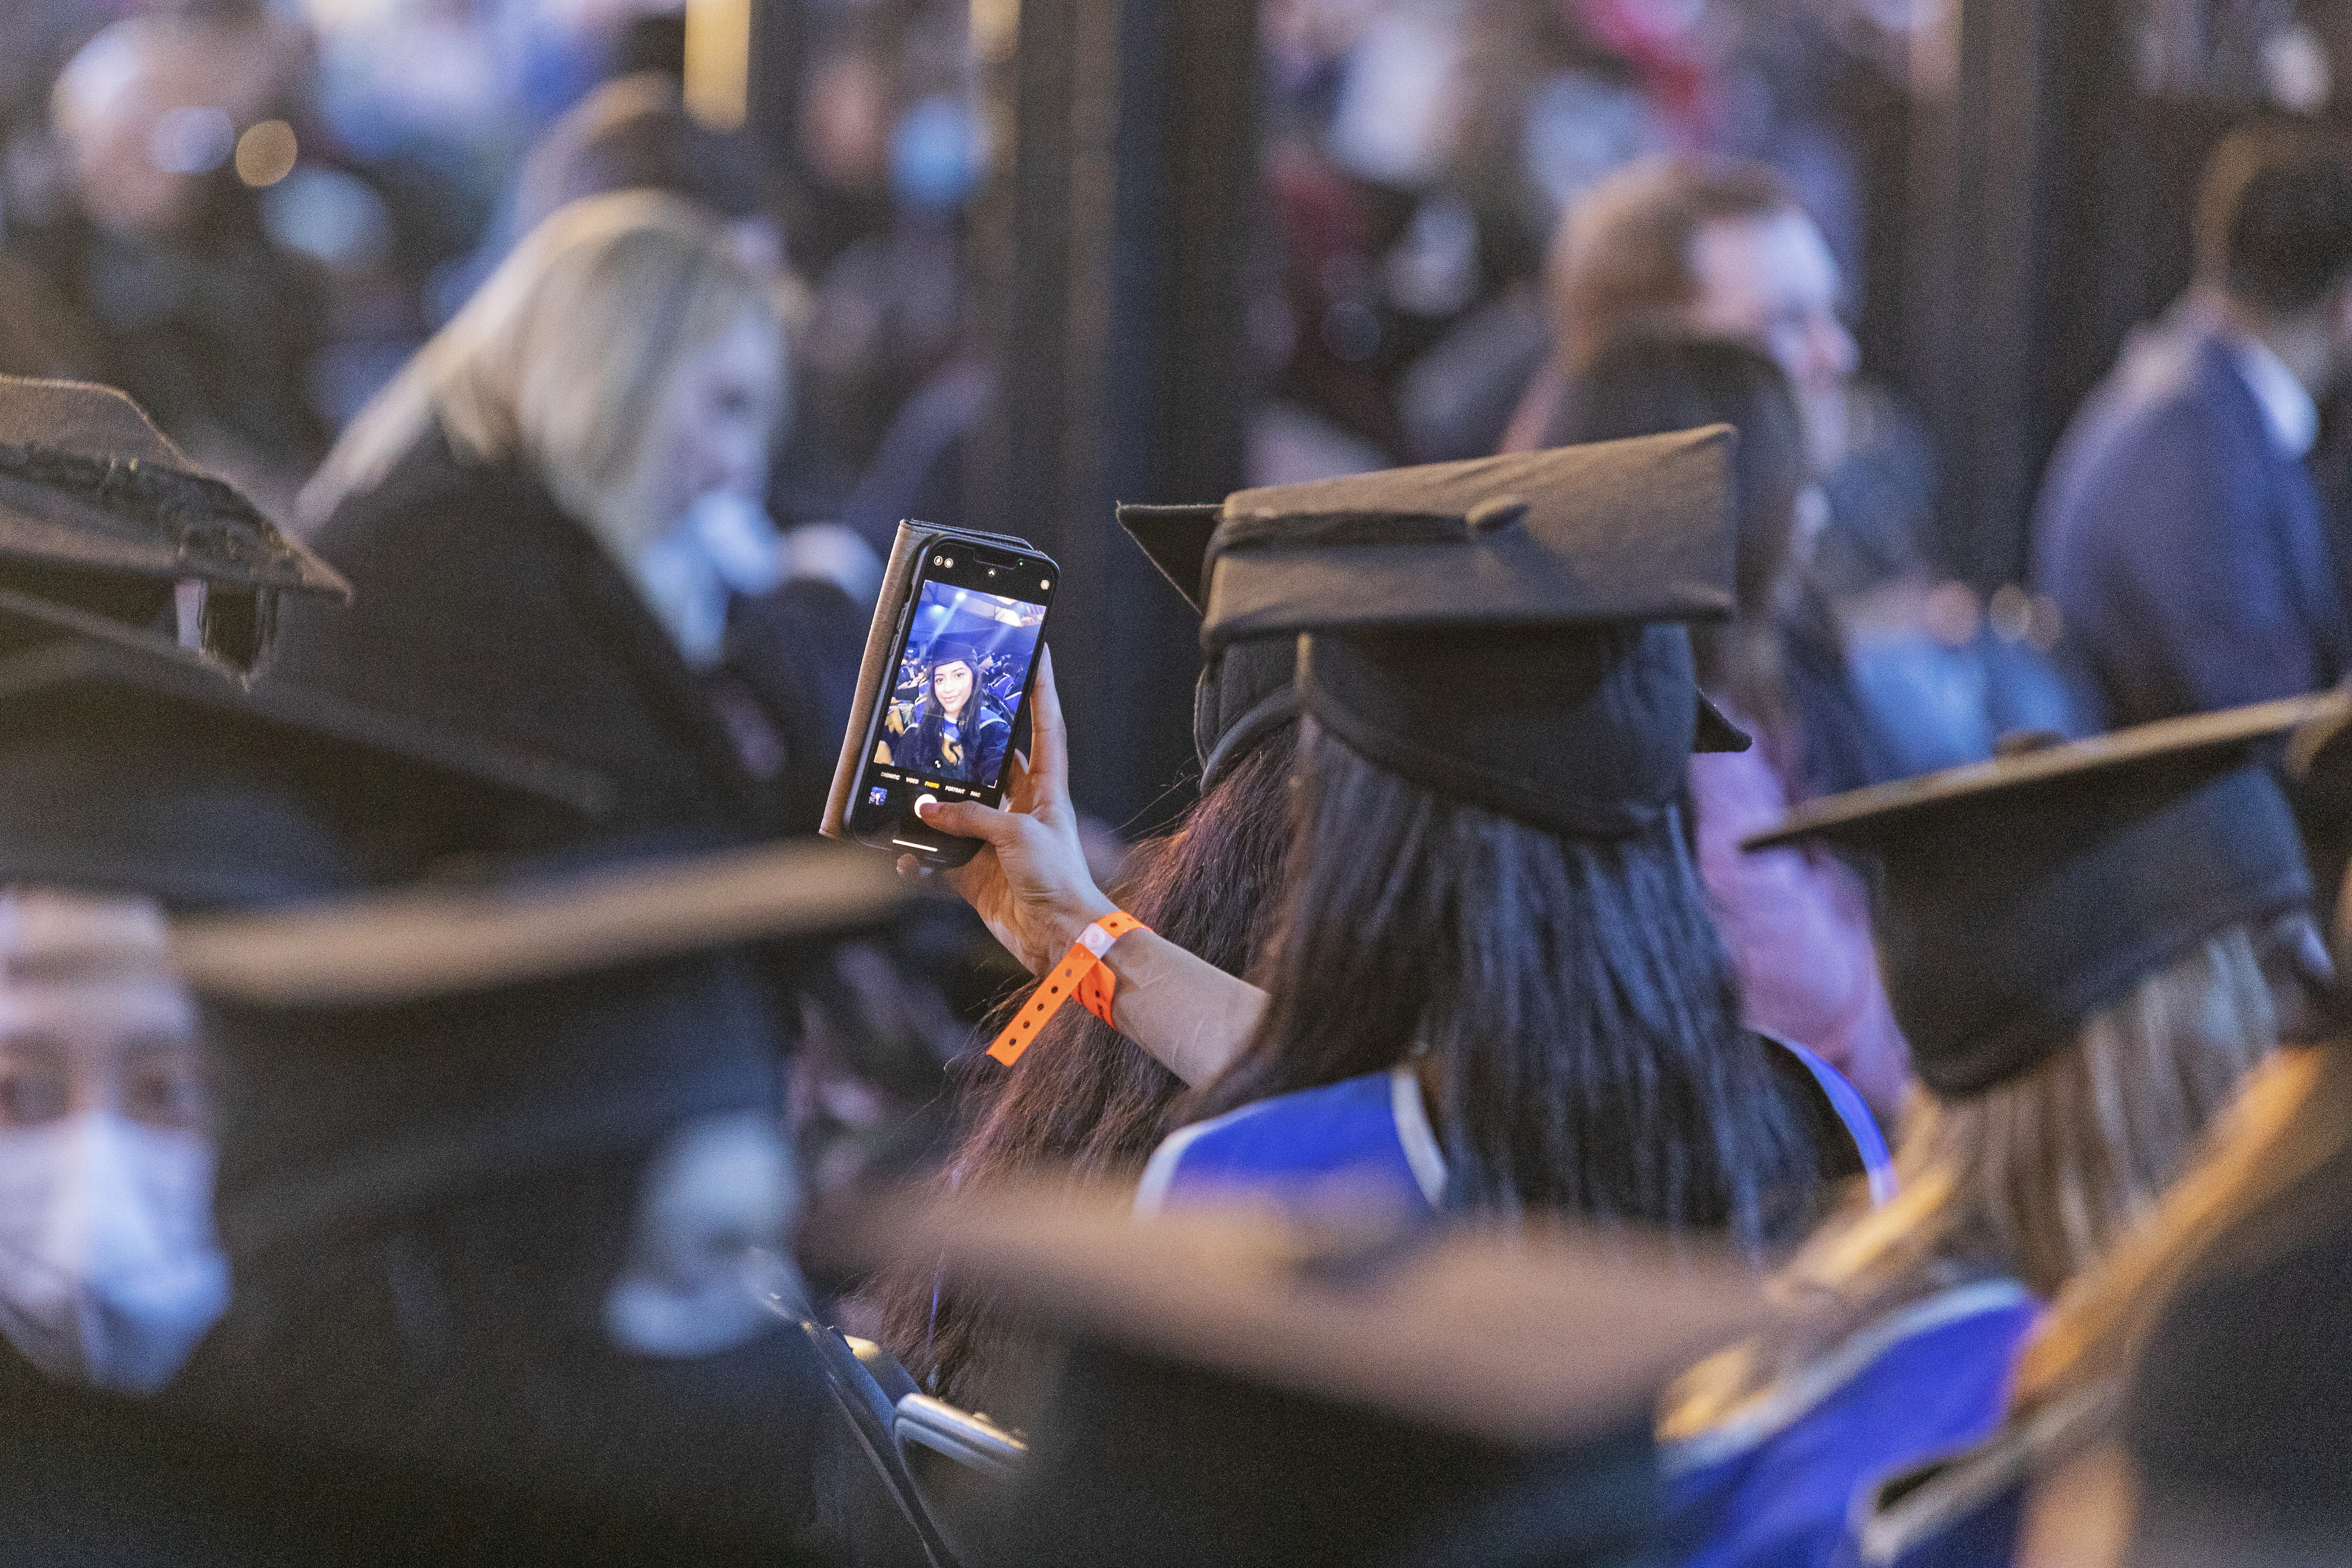 A student at graduation pictured from behind, taking a selfie